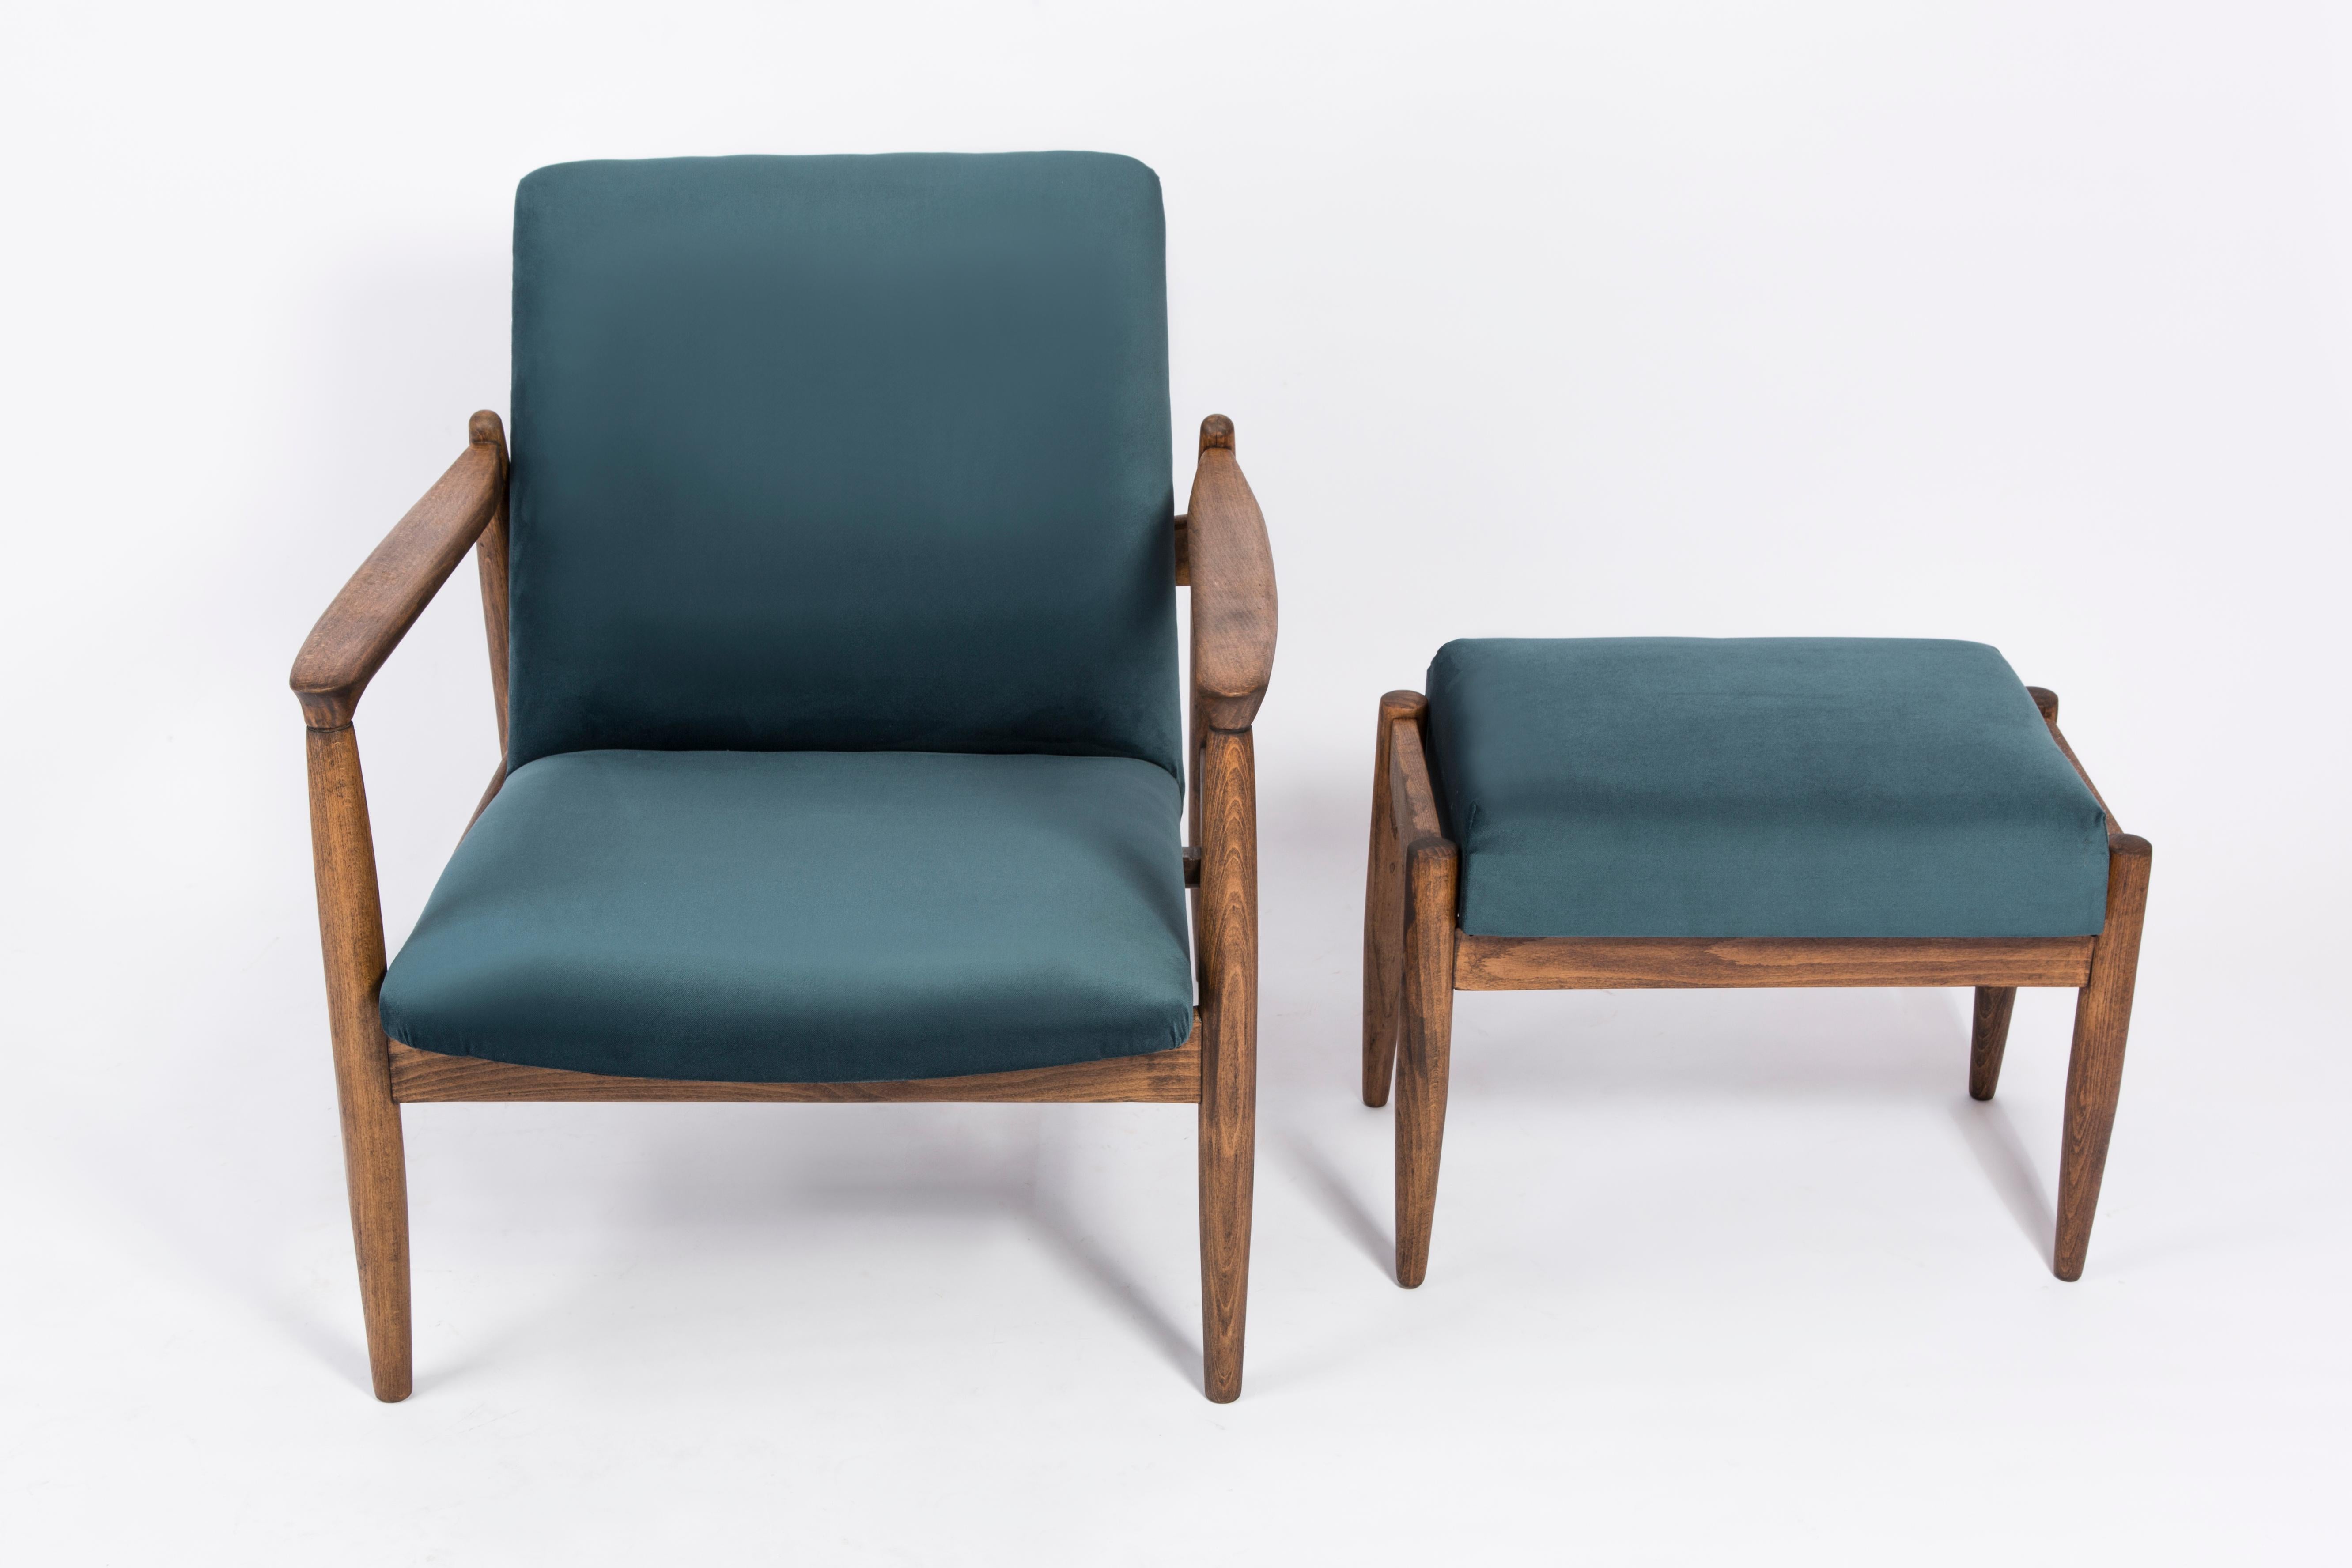 Set of beautiful armchair and stool, designed by Edmund Homa. This set were made in the 1960s in the Gosciecinska Furniture factory. They are made from solid beechwood. The GFM type armchair is regarded one of the best polish armchair design from